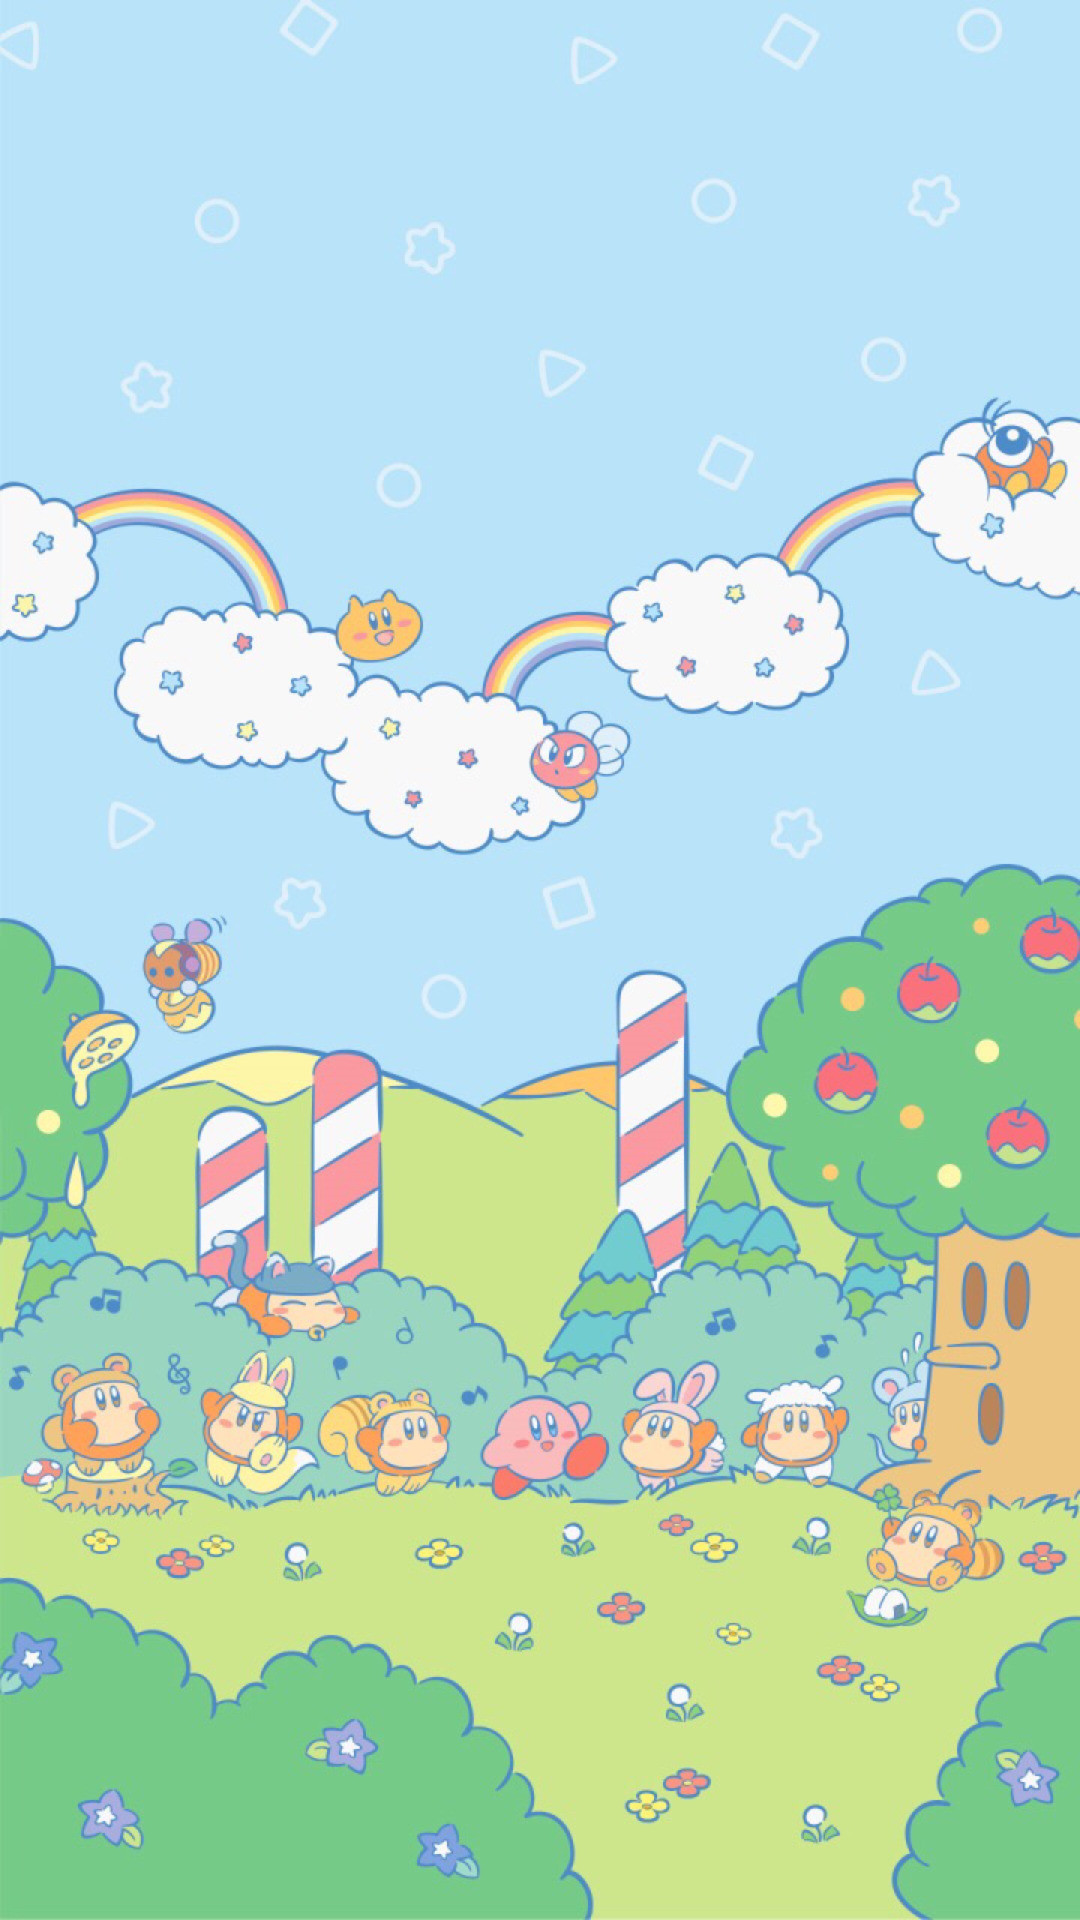 1080x1920 atokyojourney: “New kirby wallpapers released on Nintendo's line :3 ”